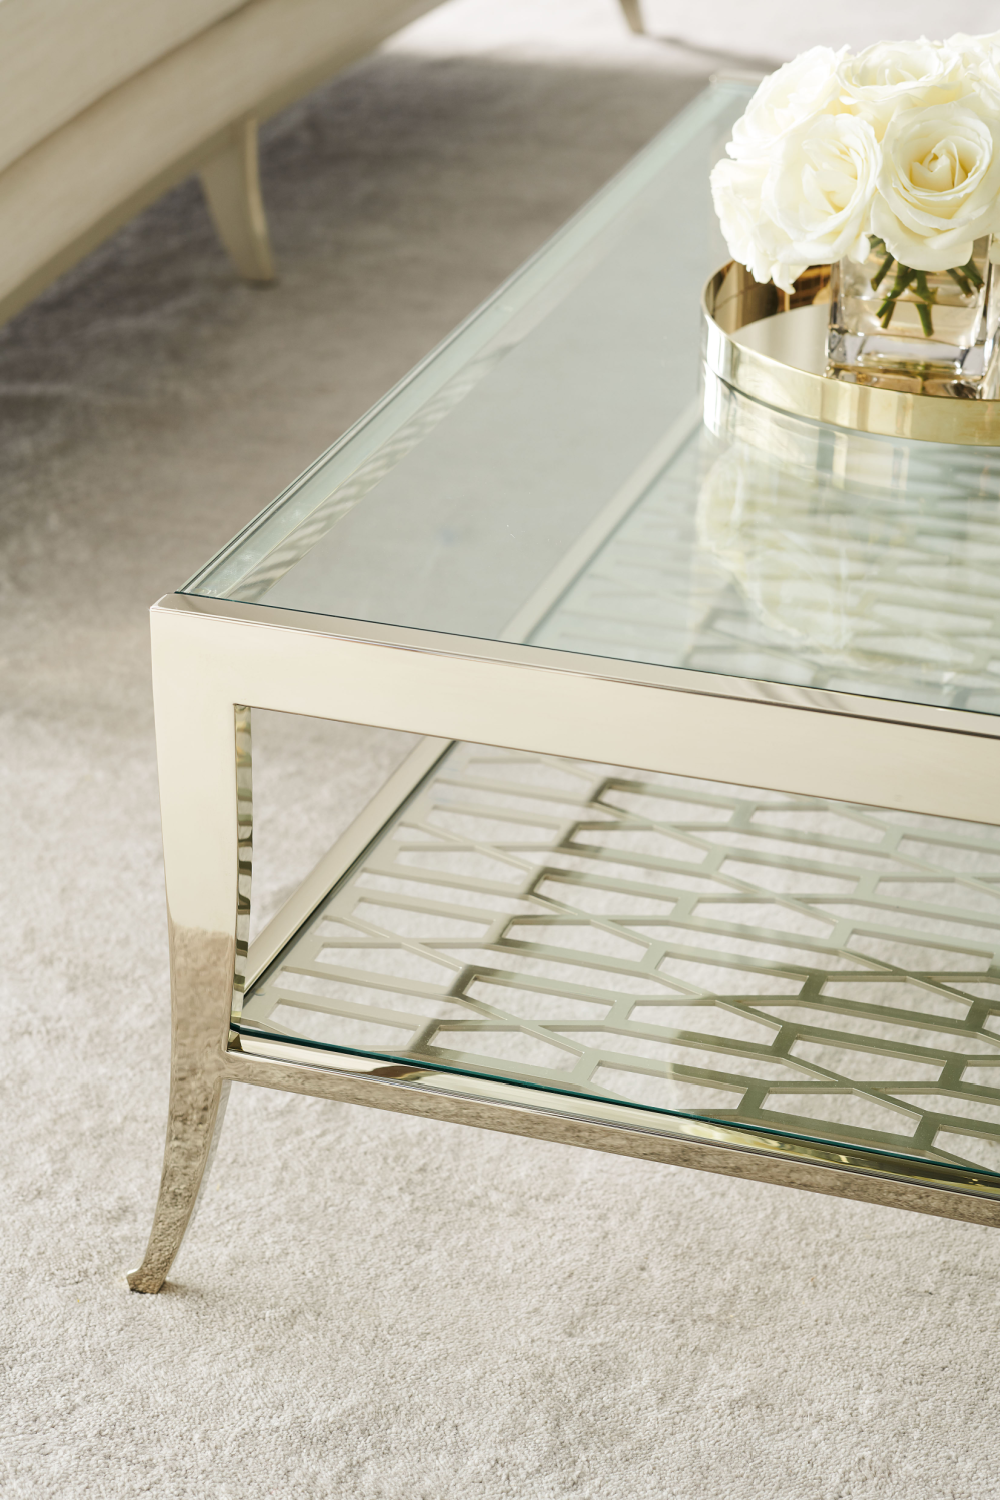 Gold Square Coffee Table | Caracole Pattern Recognition | Oroa.com